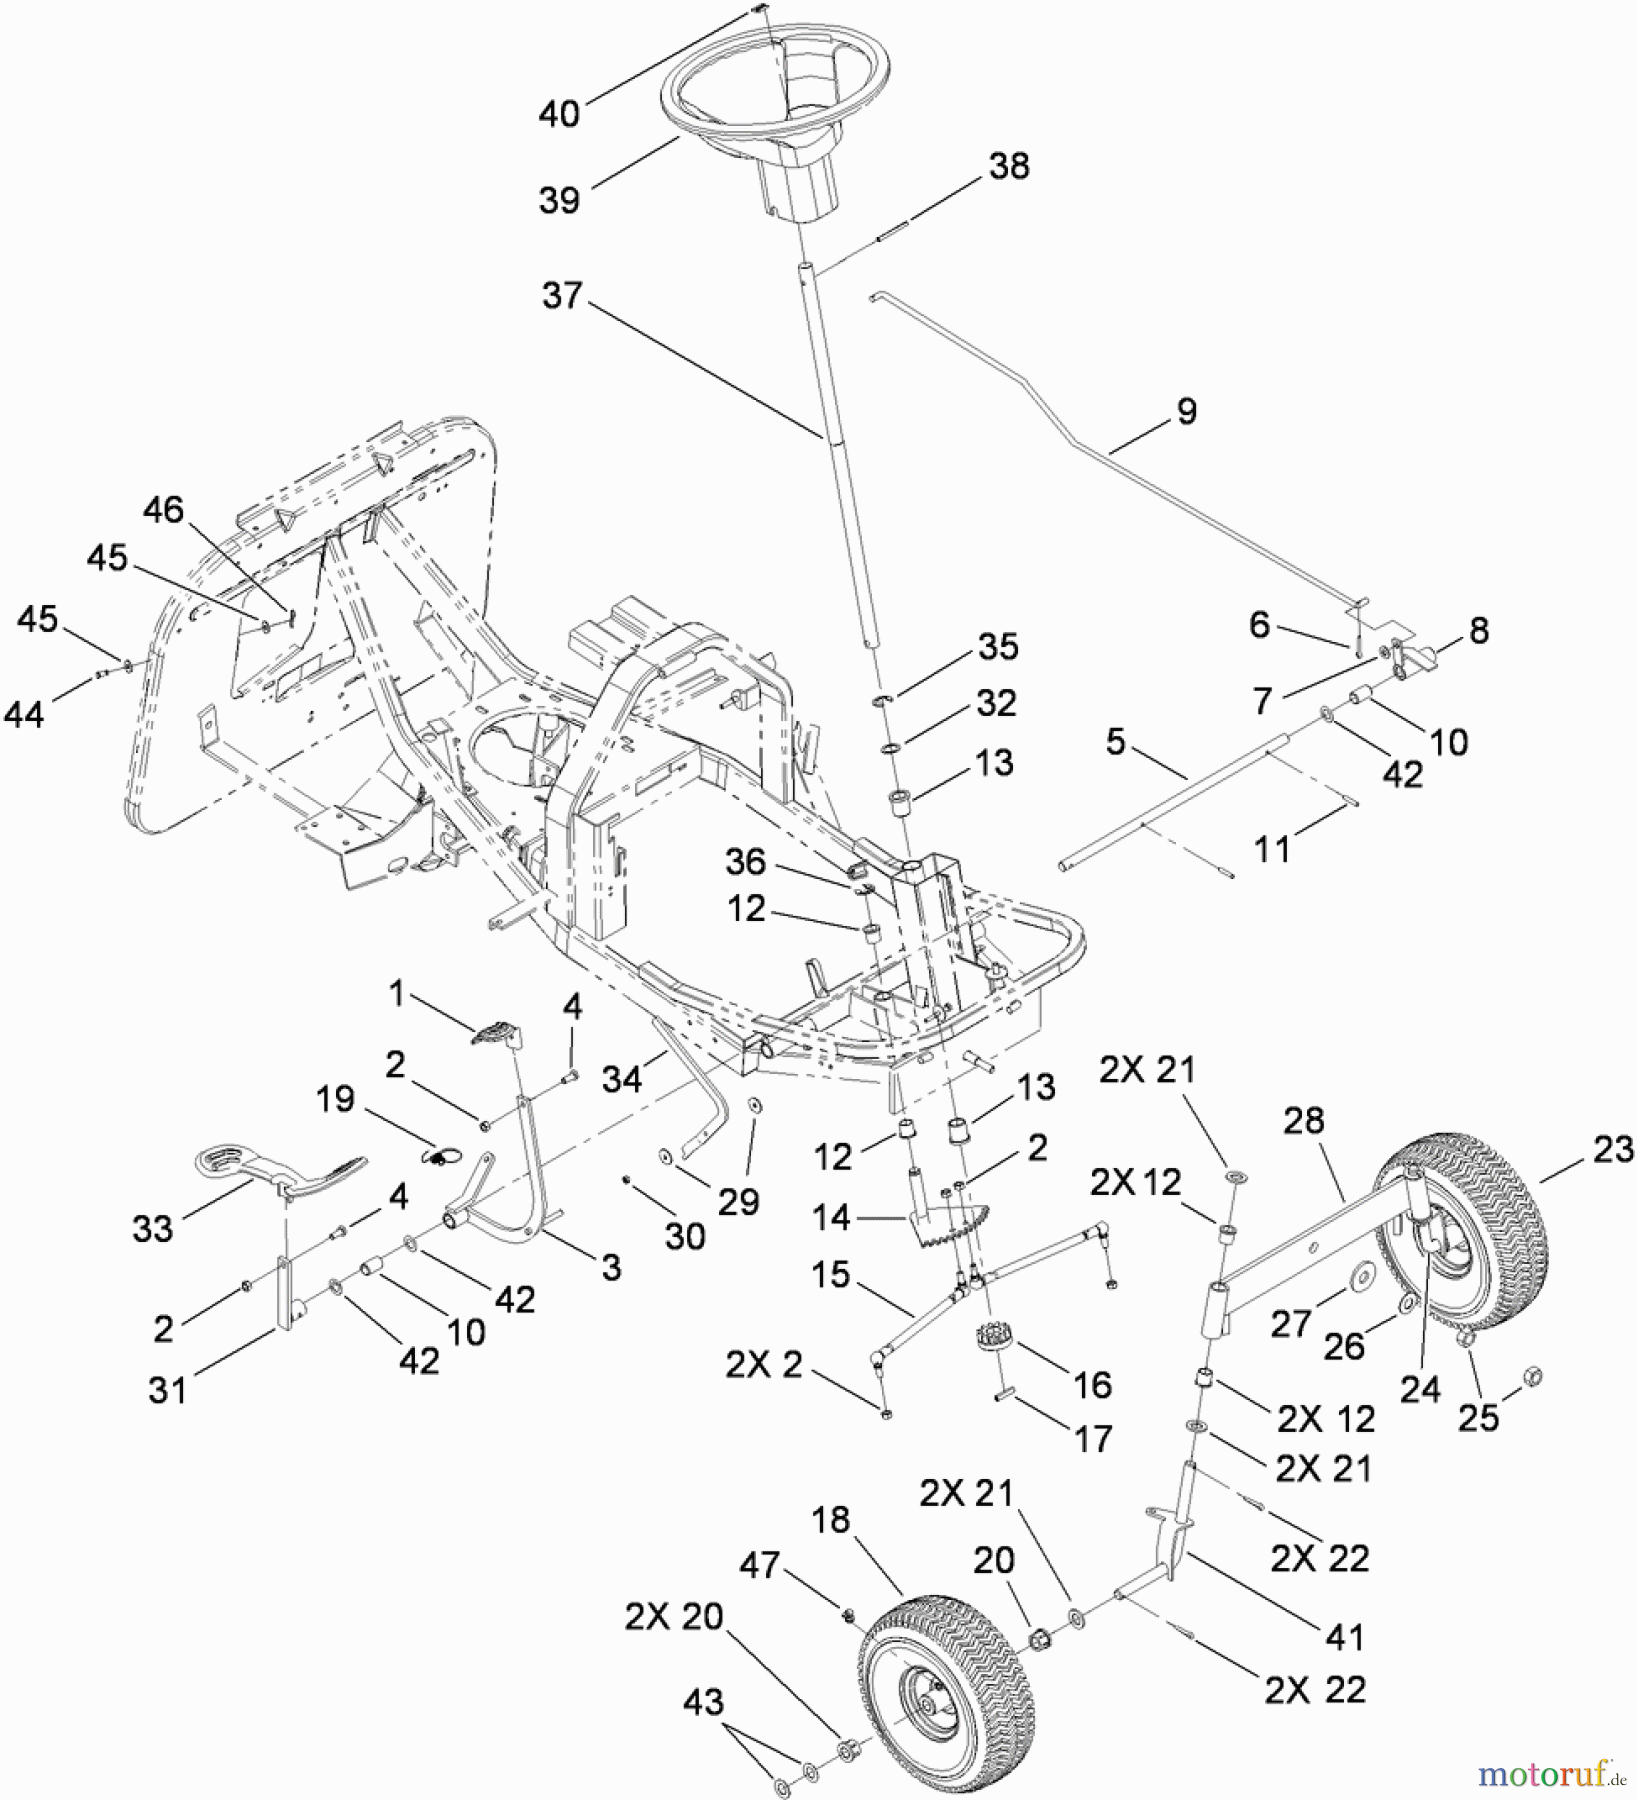  Toro Neu Mowers, Rear-Engine Rider 70186 (H132) - Toro H132 Rear-Engine Riding Mower, 2010 (310000001-310999999) FRONT AXLE AND STEERING ASSEMBLY